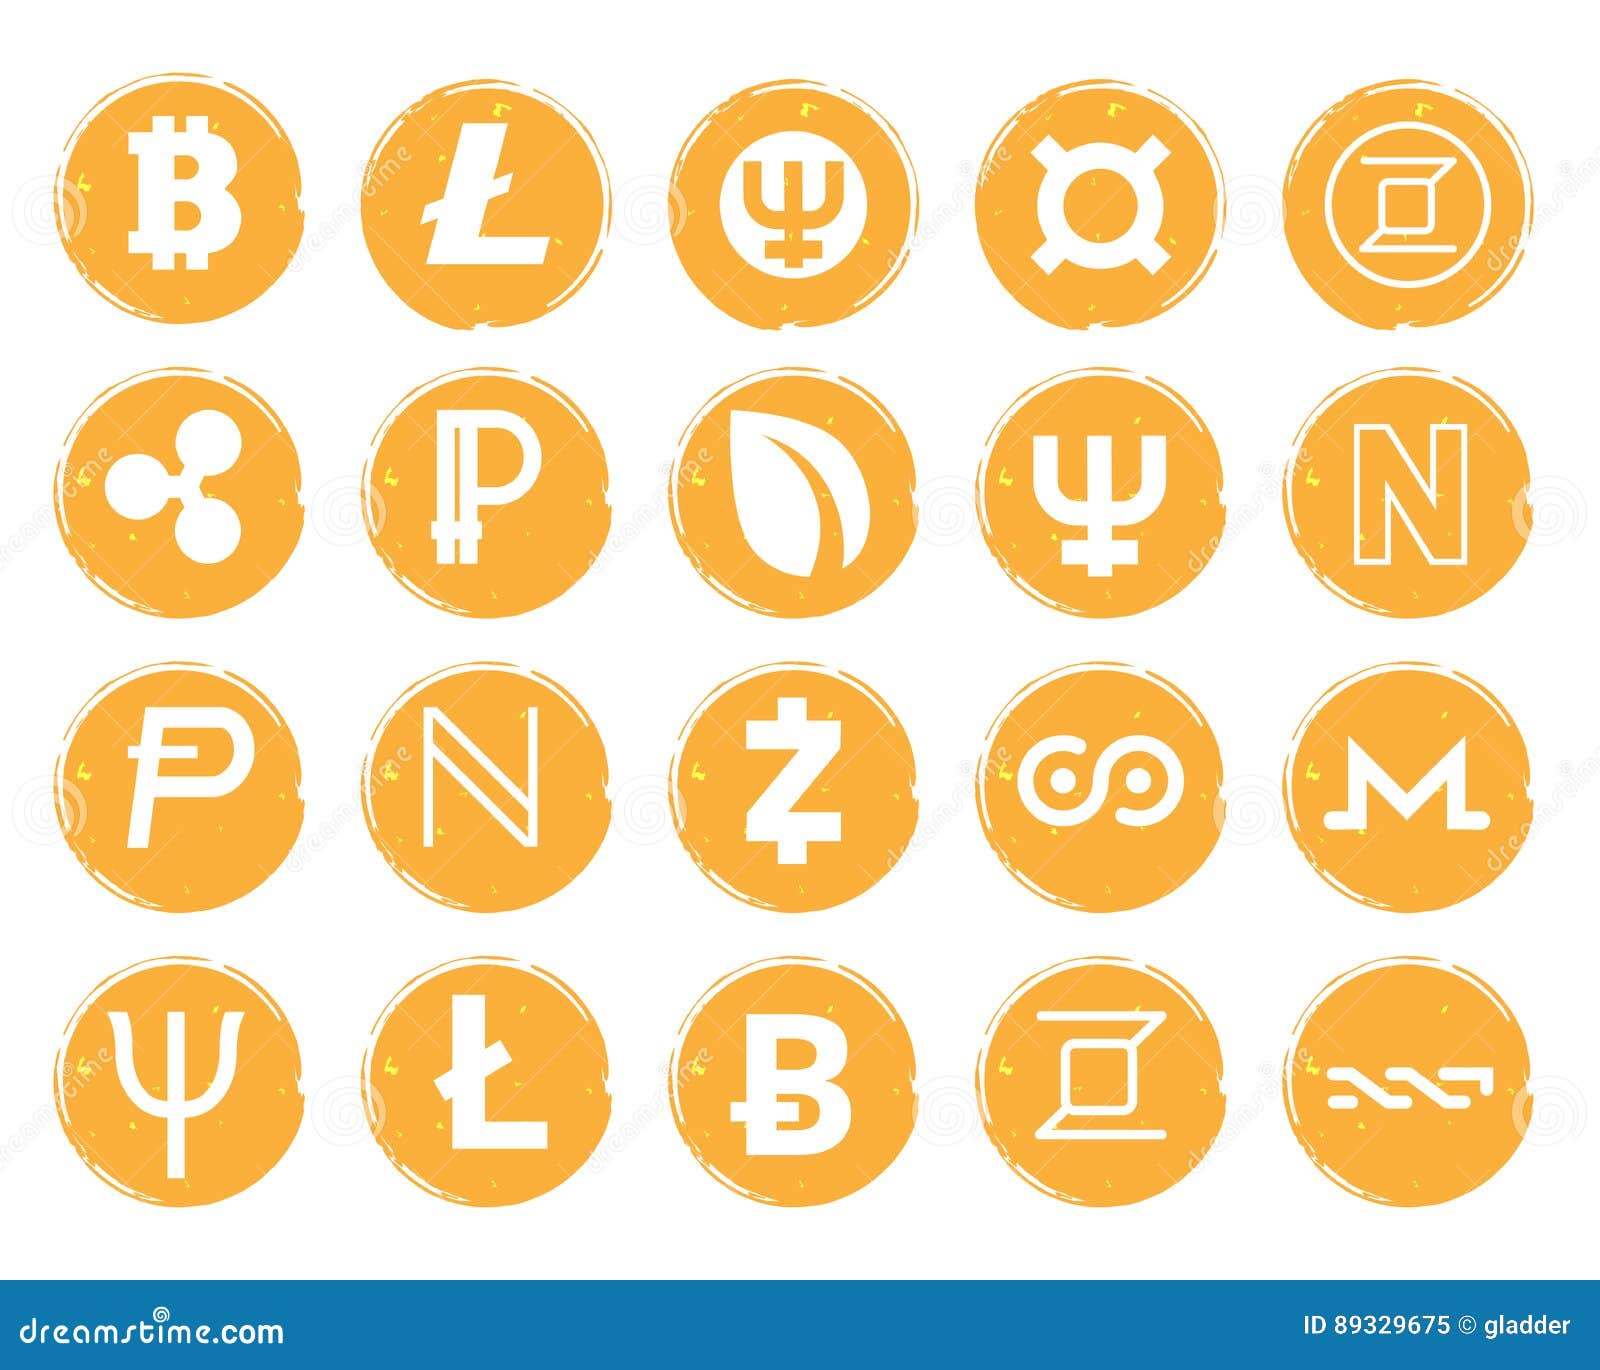 Twenty Golden Icons With White Images Of Various Symbols ...